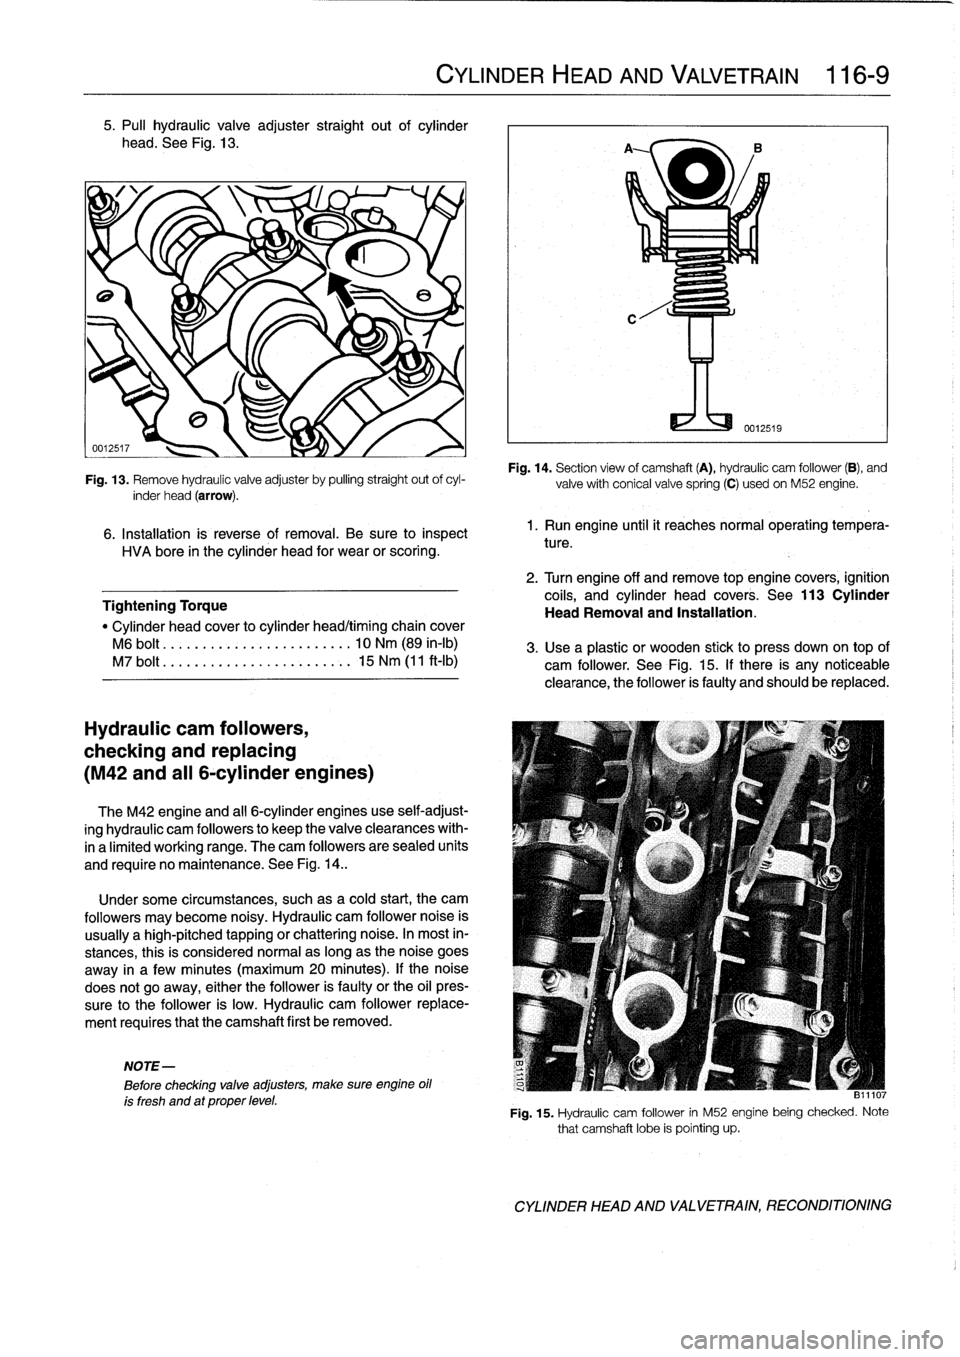 BMW 325i 1994 E36 Owners Manual 5
.
Pull
hydraulic
valve
adjuster
straight
out
of
cylinder

head
.
See
Fig
.
13
.

Fig
.
13
.
Remove
hydraulic
valve
adjuster
by
pulling
straight
out
ofcyl-
inder
head
(arrow)
.

6
.
Installation
is
r